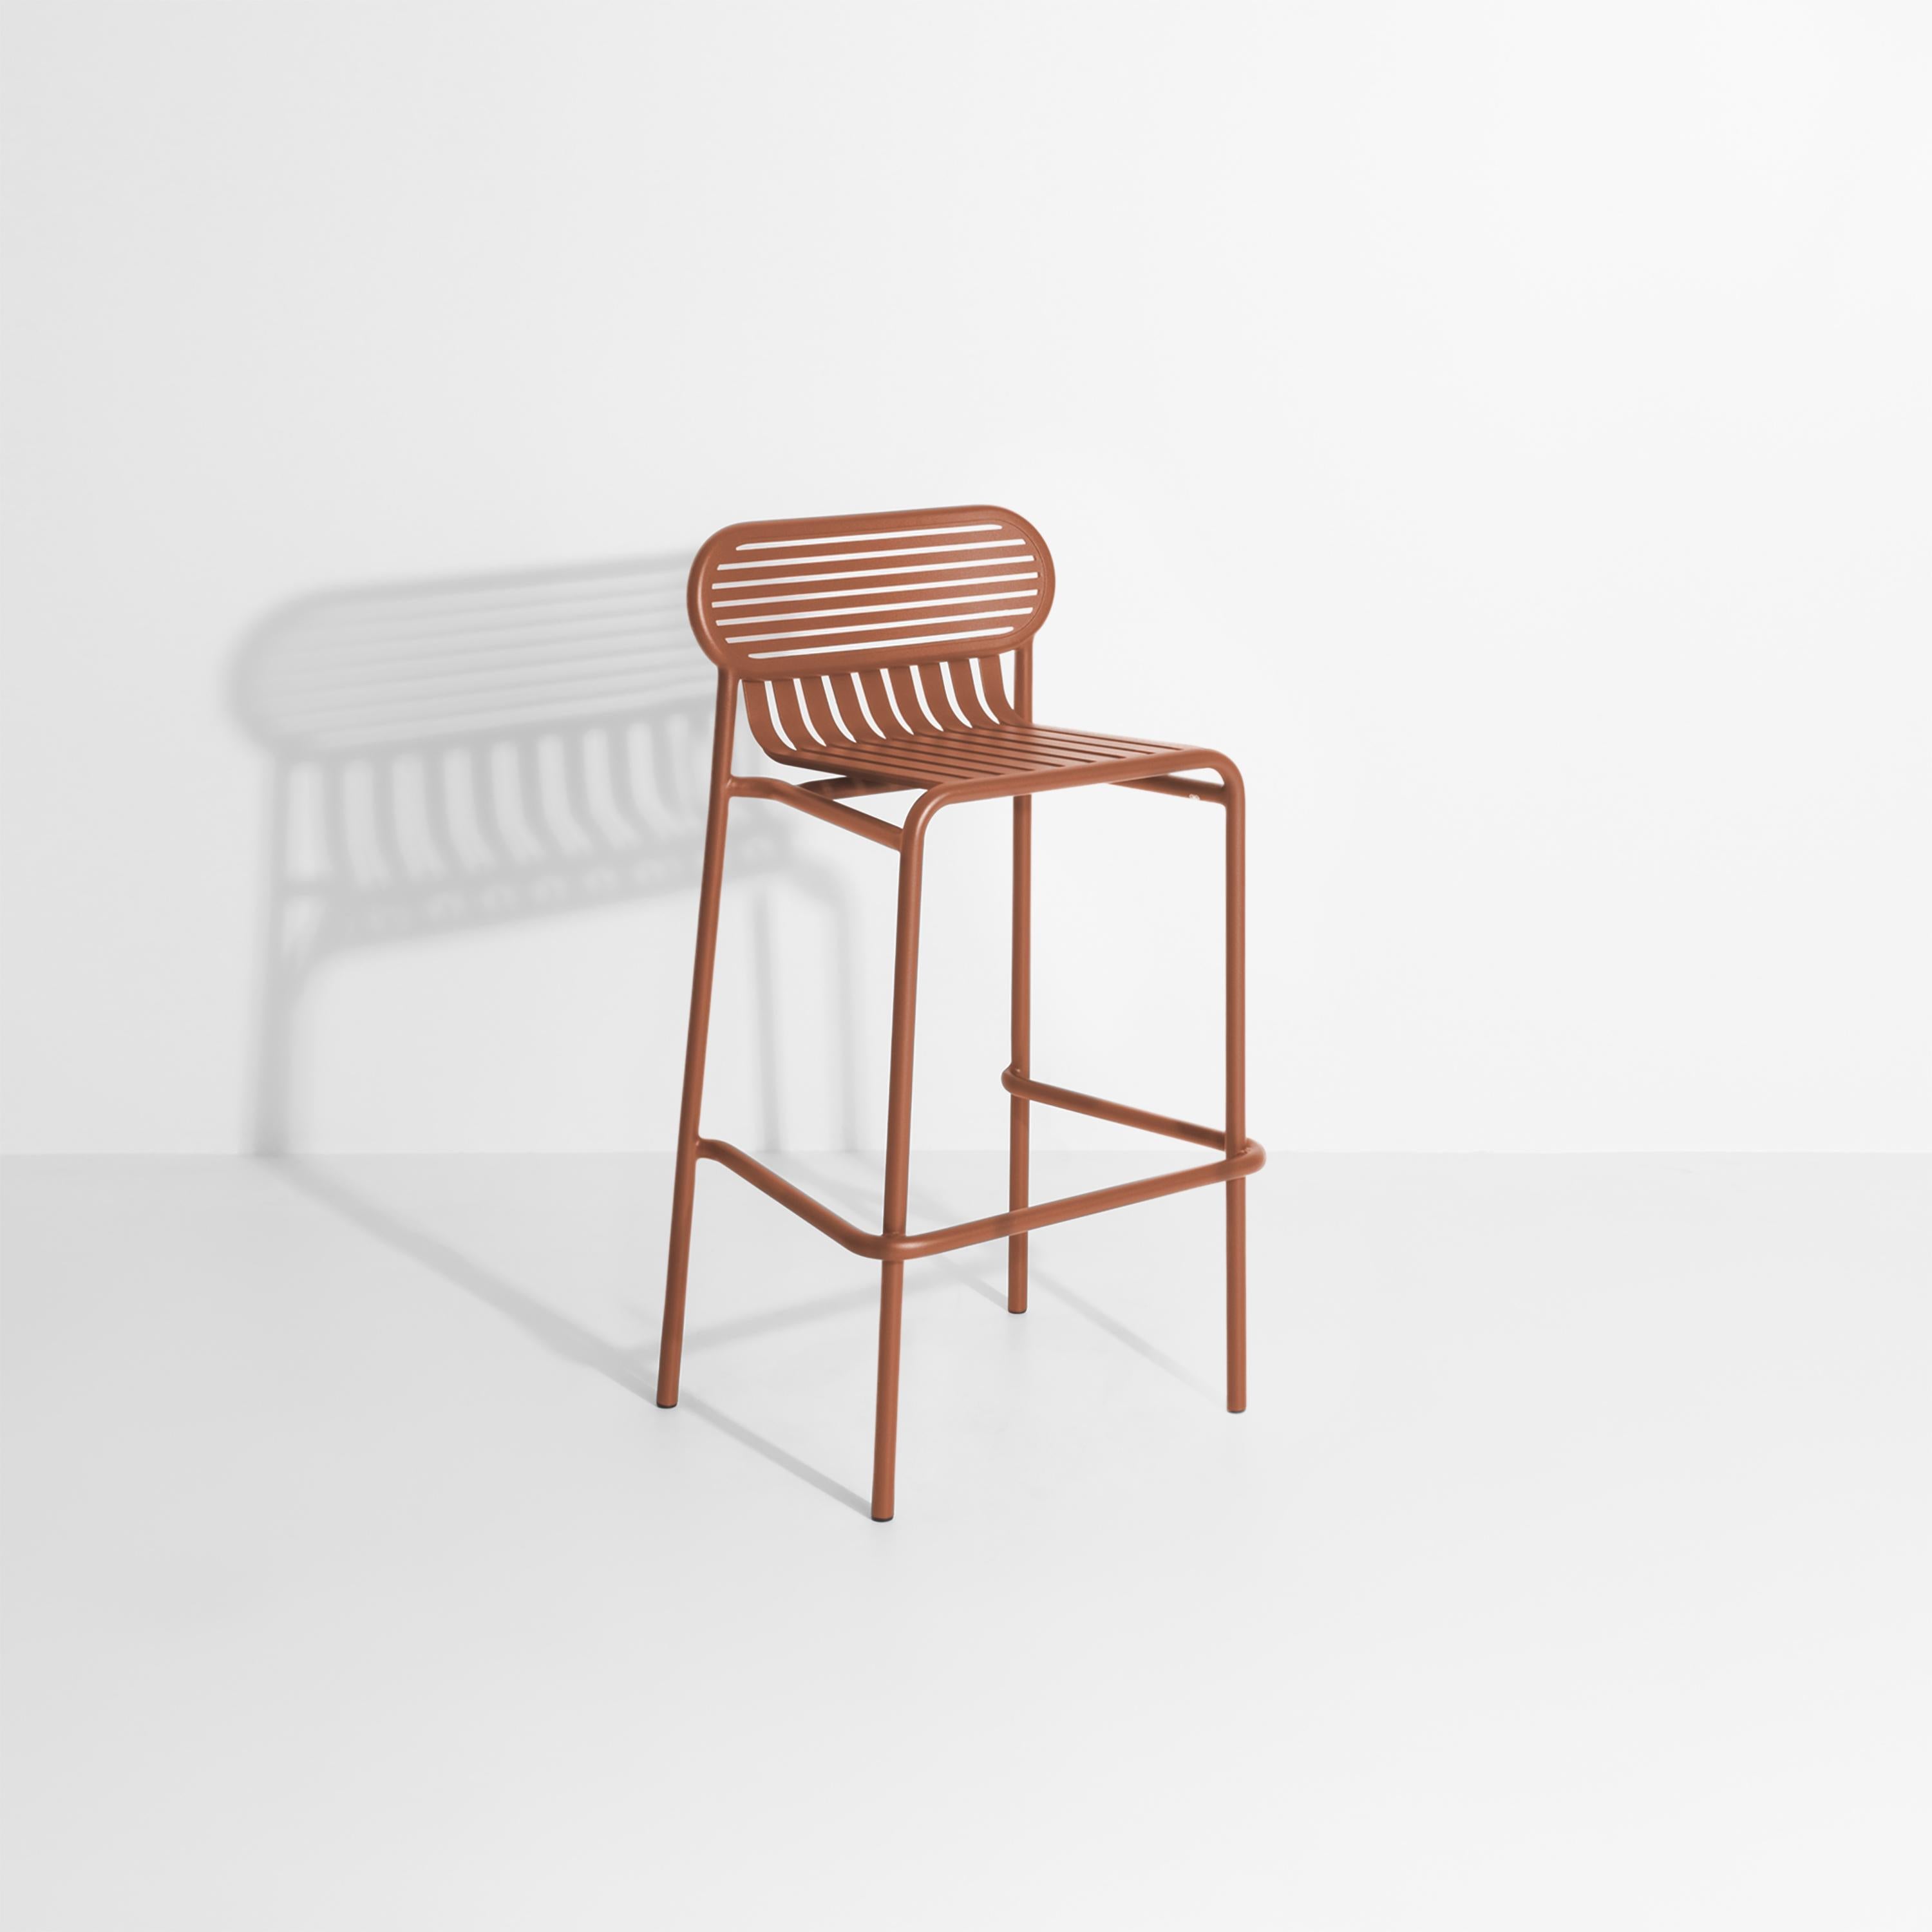 Petite Friture Week-End Bar Stool in Terracotta Aluminium by Studio BrichetZiegler, 2017

The week-end collection is a full range of outdoor furniture, in aluminium grained epoxy paint, matt finish, that includes 18 functions and 8 colours for the